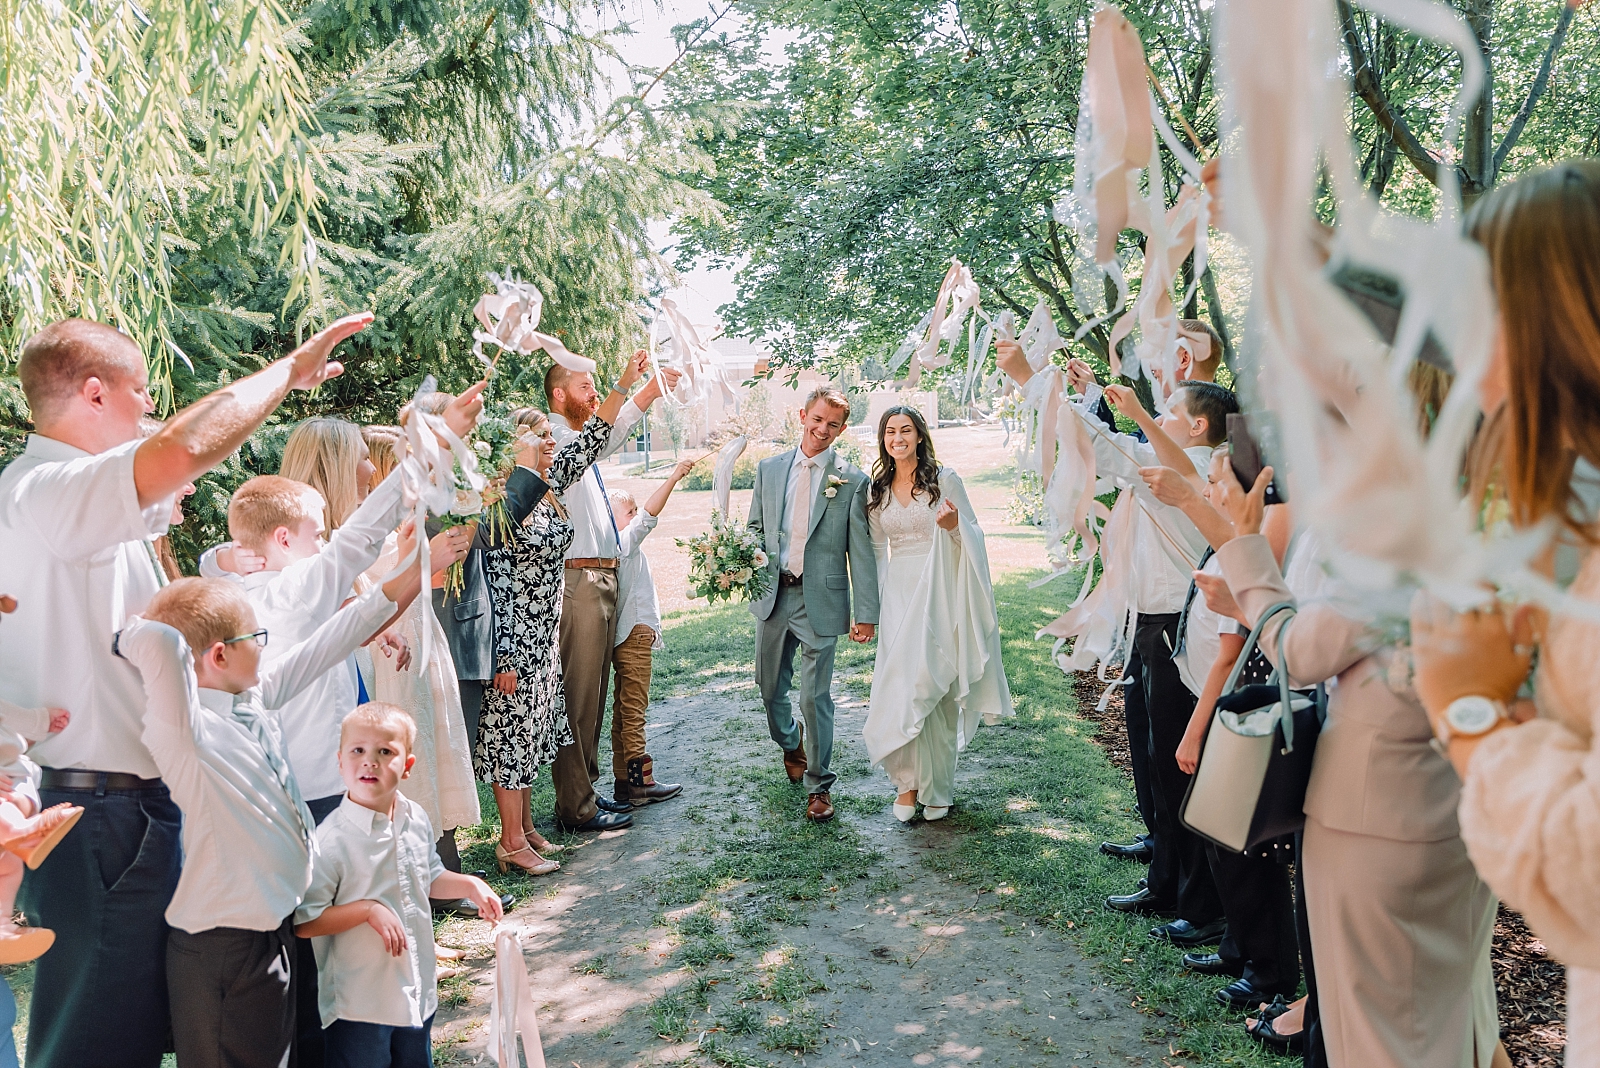 bride and groom leaving their reception with family and friends throwing petals on them